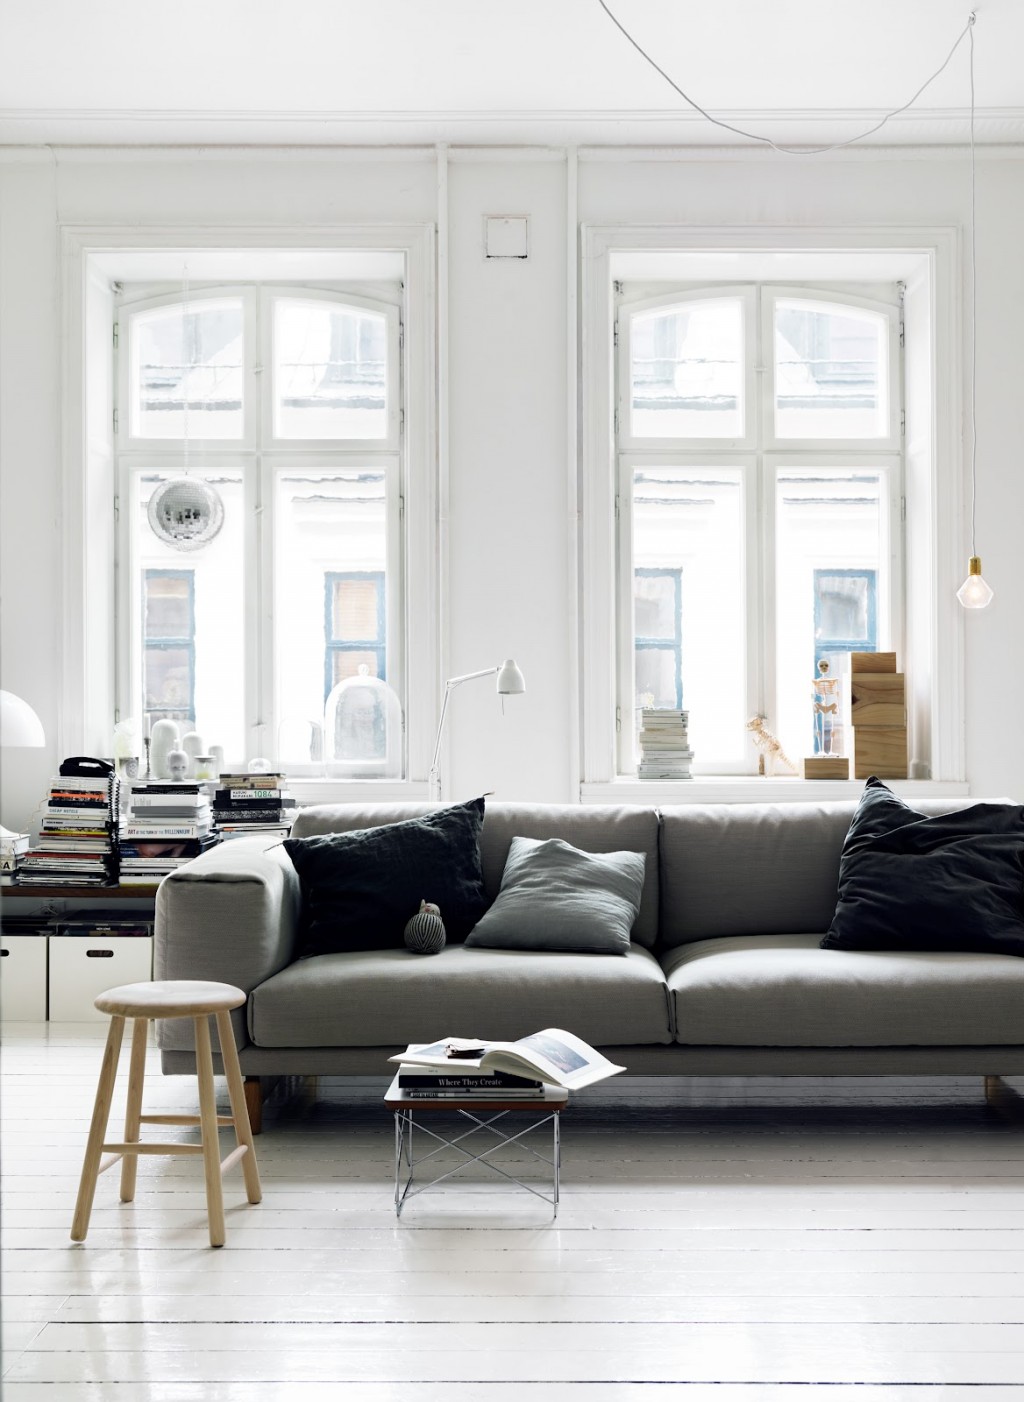 Home-of-interior-stylist-Emma-Persson-Lagerberg-photographed-by-Petra-Bindel.-2